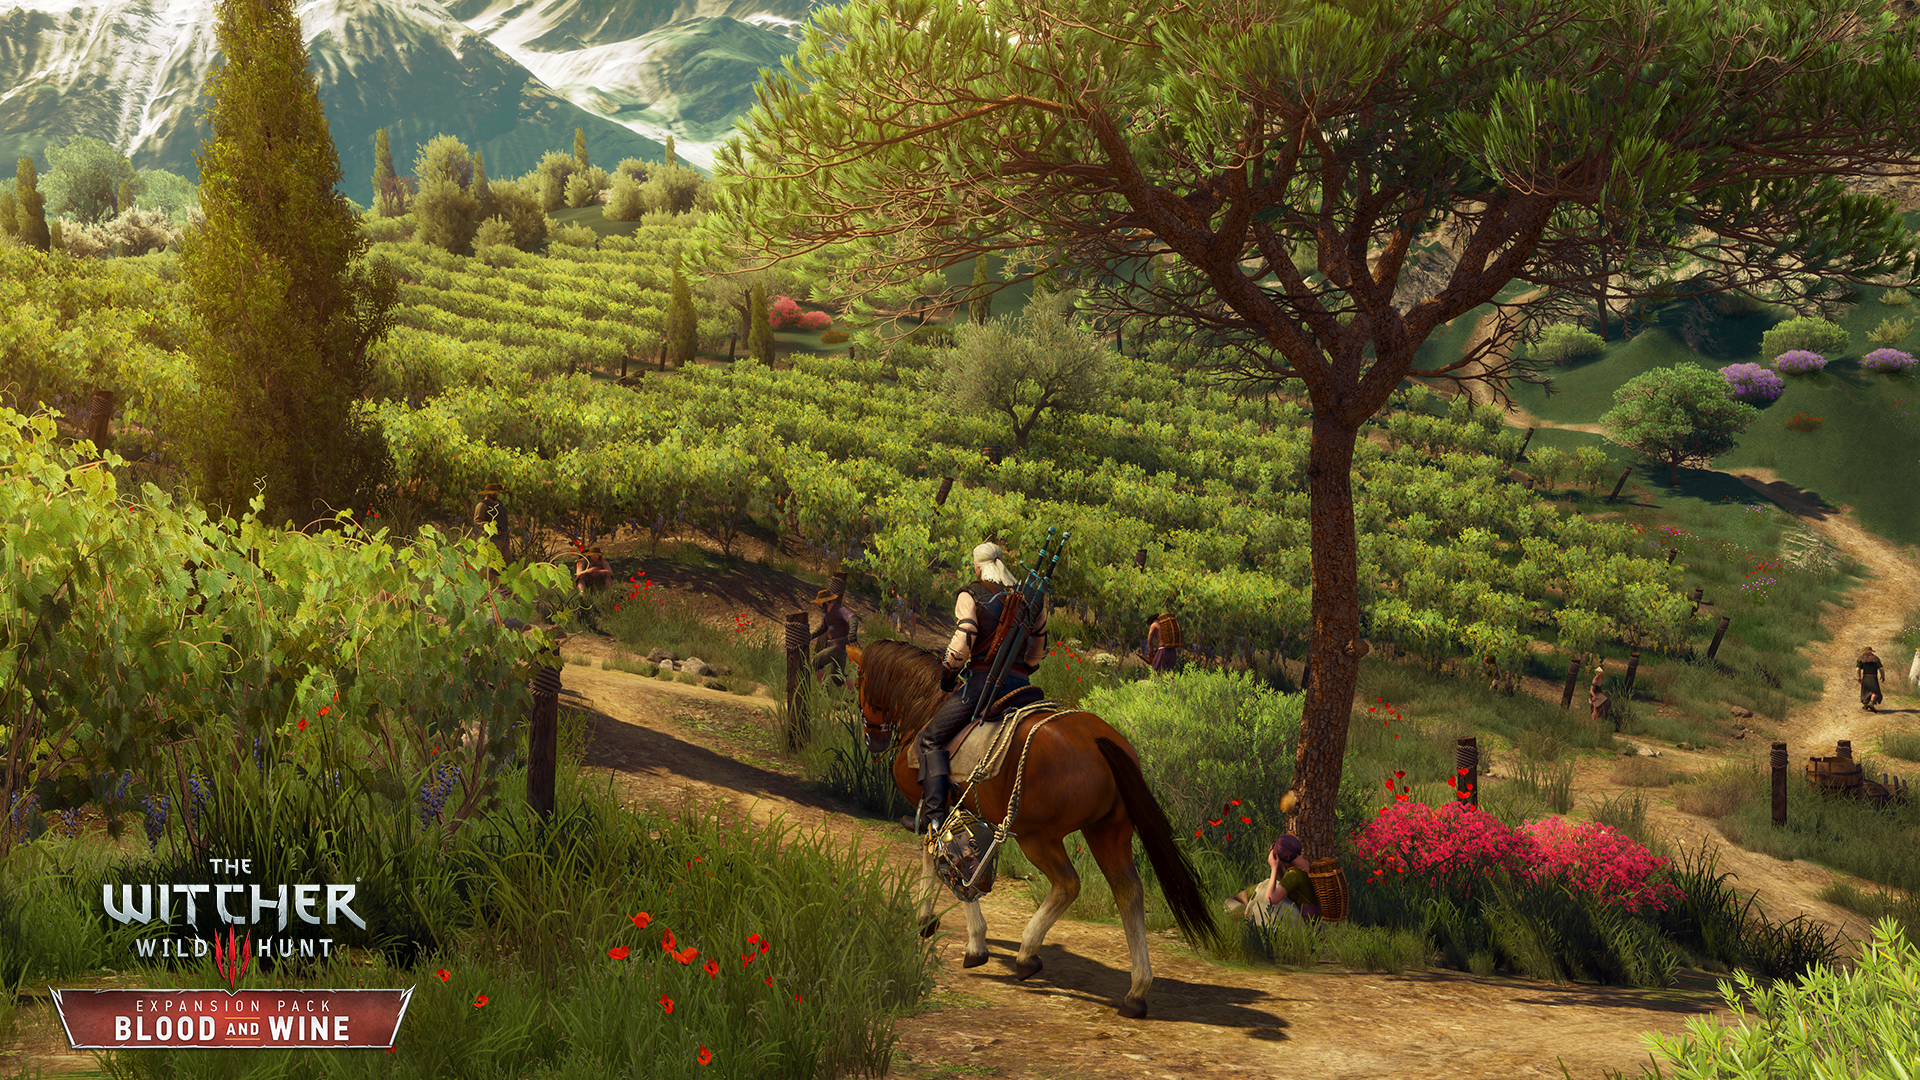 Media asset in full size related to 3dfxzone.it news item entitled as follows: Nuovi screenshot del DLC Blood and Wine di The Witcher 3: Wild Hunt | Image Name: news24302_The-Witcher-3-Wild-Hunt-Blood-and-Wine-Screenshot_5.png